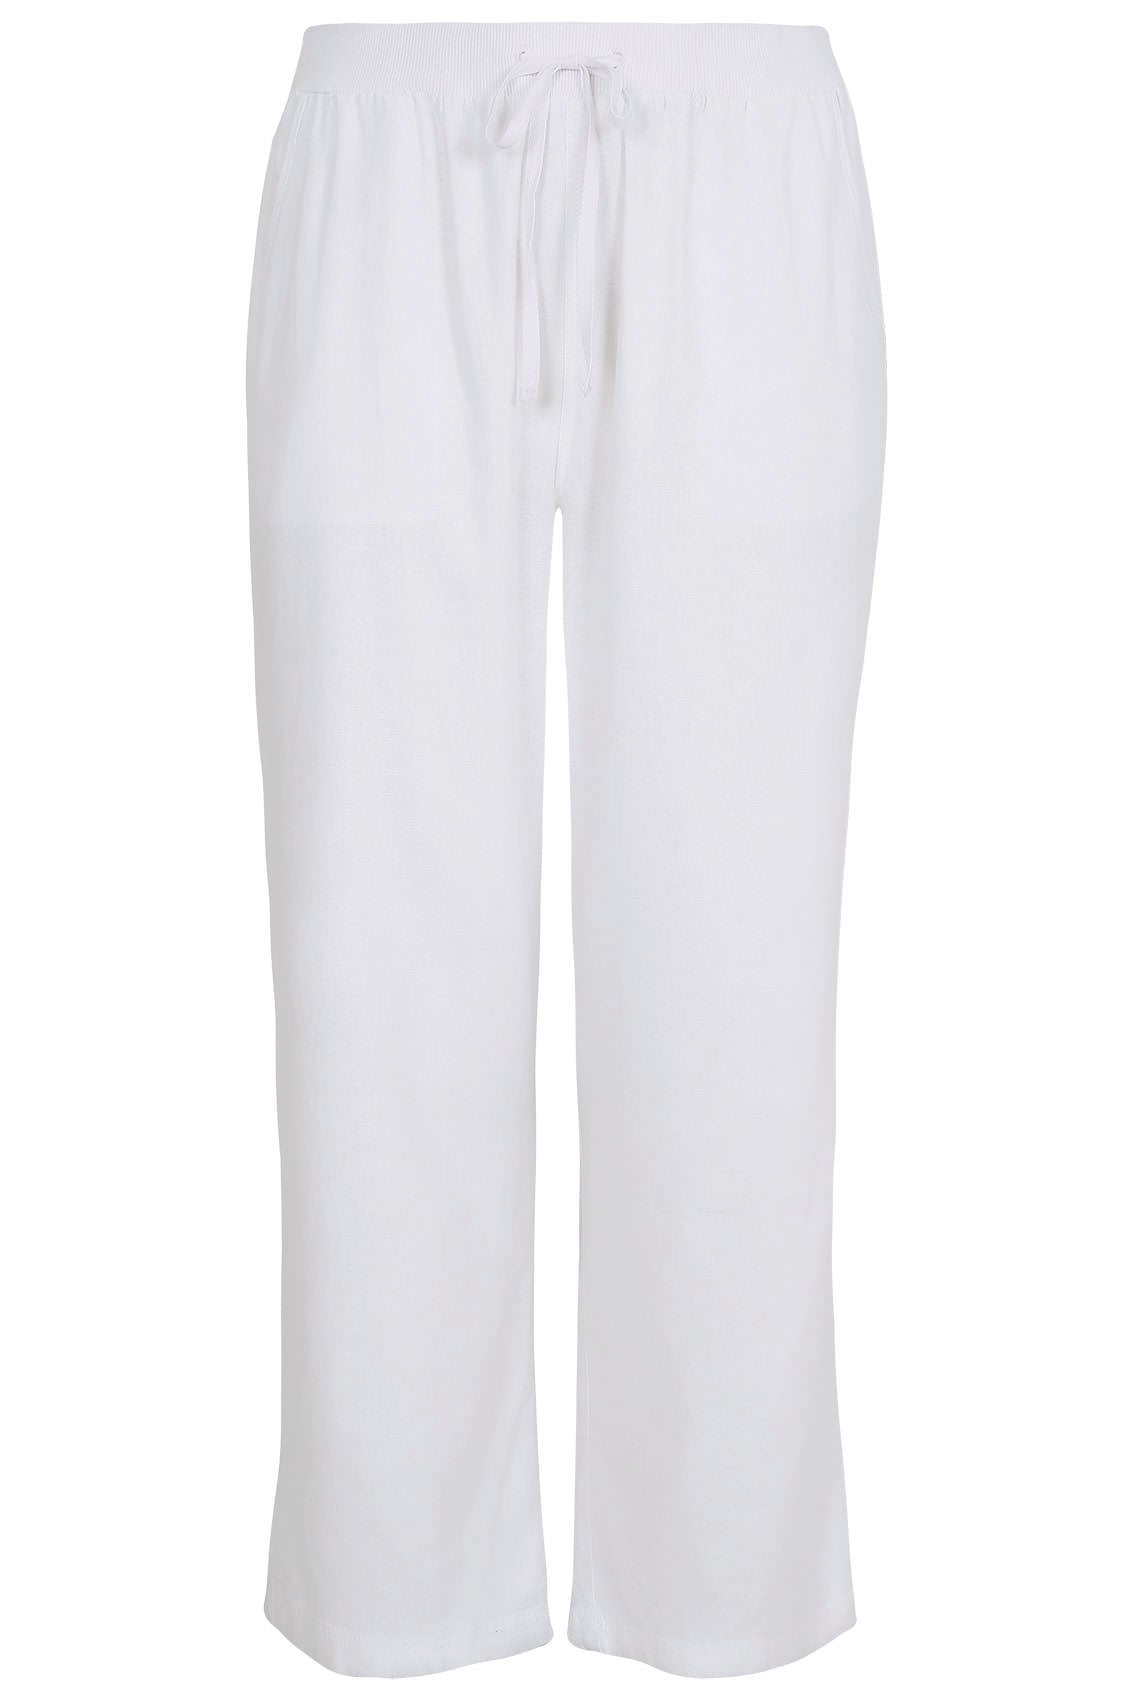 White Linen Mix Pull On Wide Leg Trousers With Pockets plus size 16 to 36